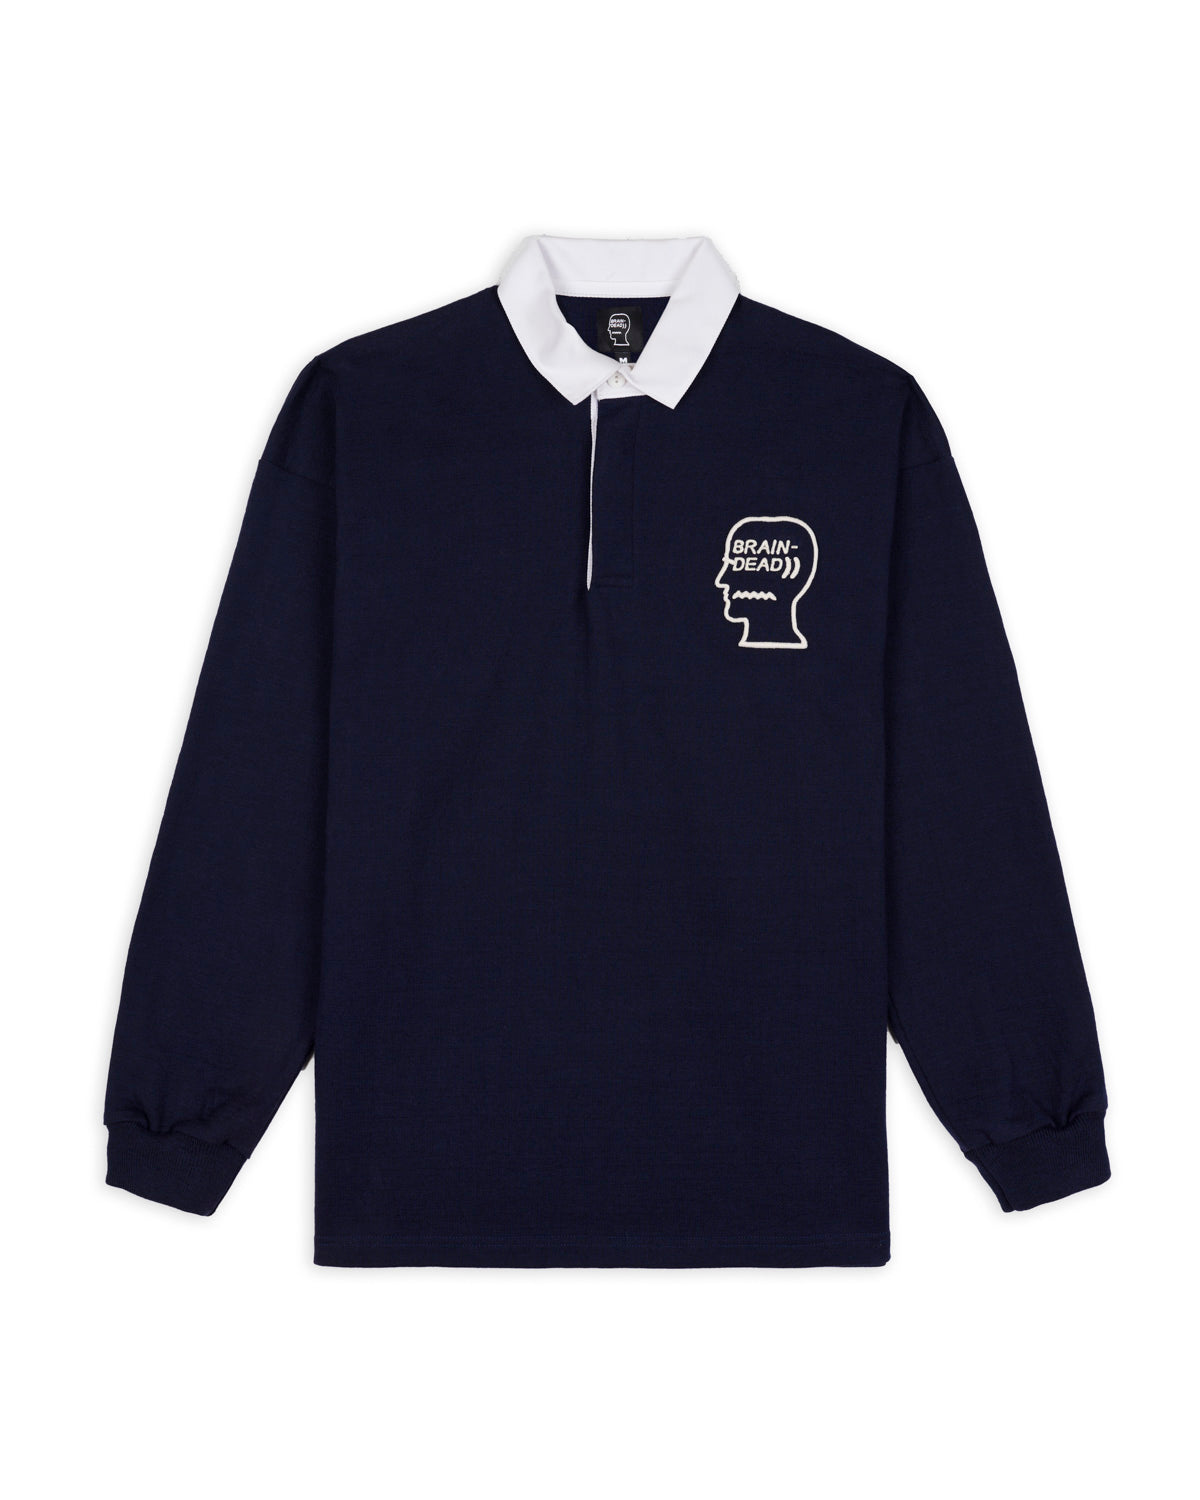 3D Embroidered Logohead Rugby Shirt - Navy 1